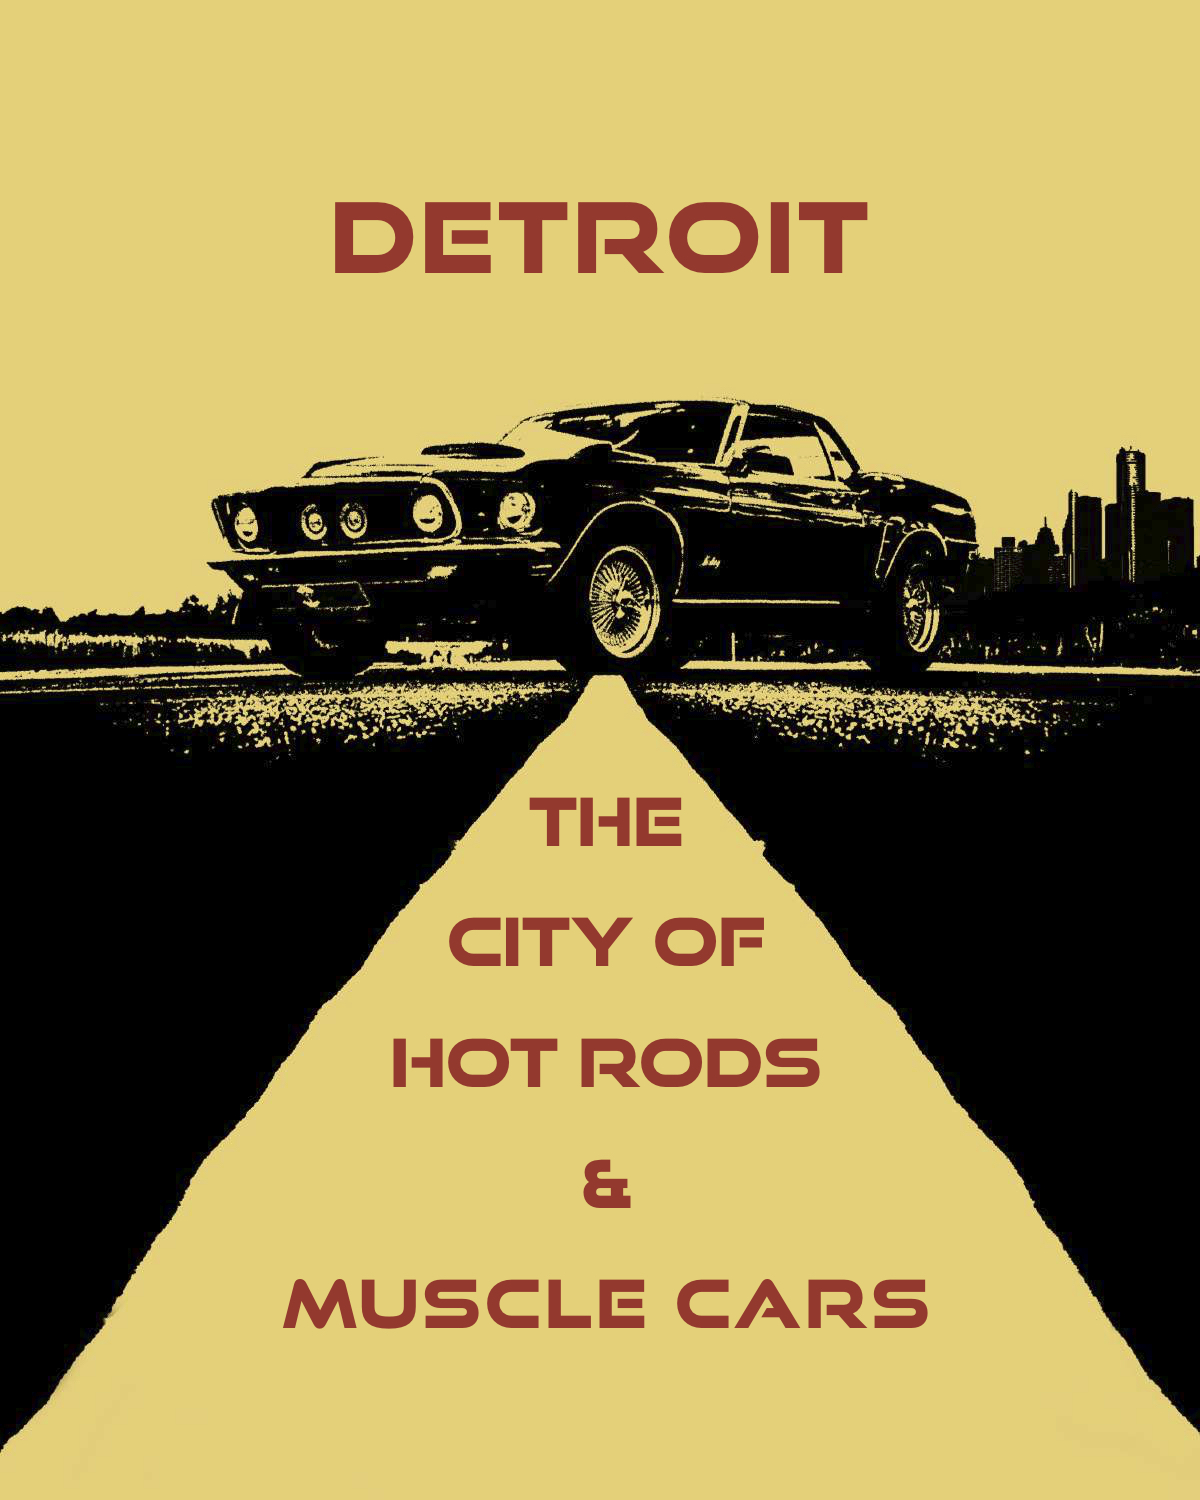 Detroit The City of Hot Rods and Muscle Cars